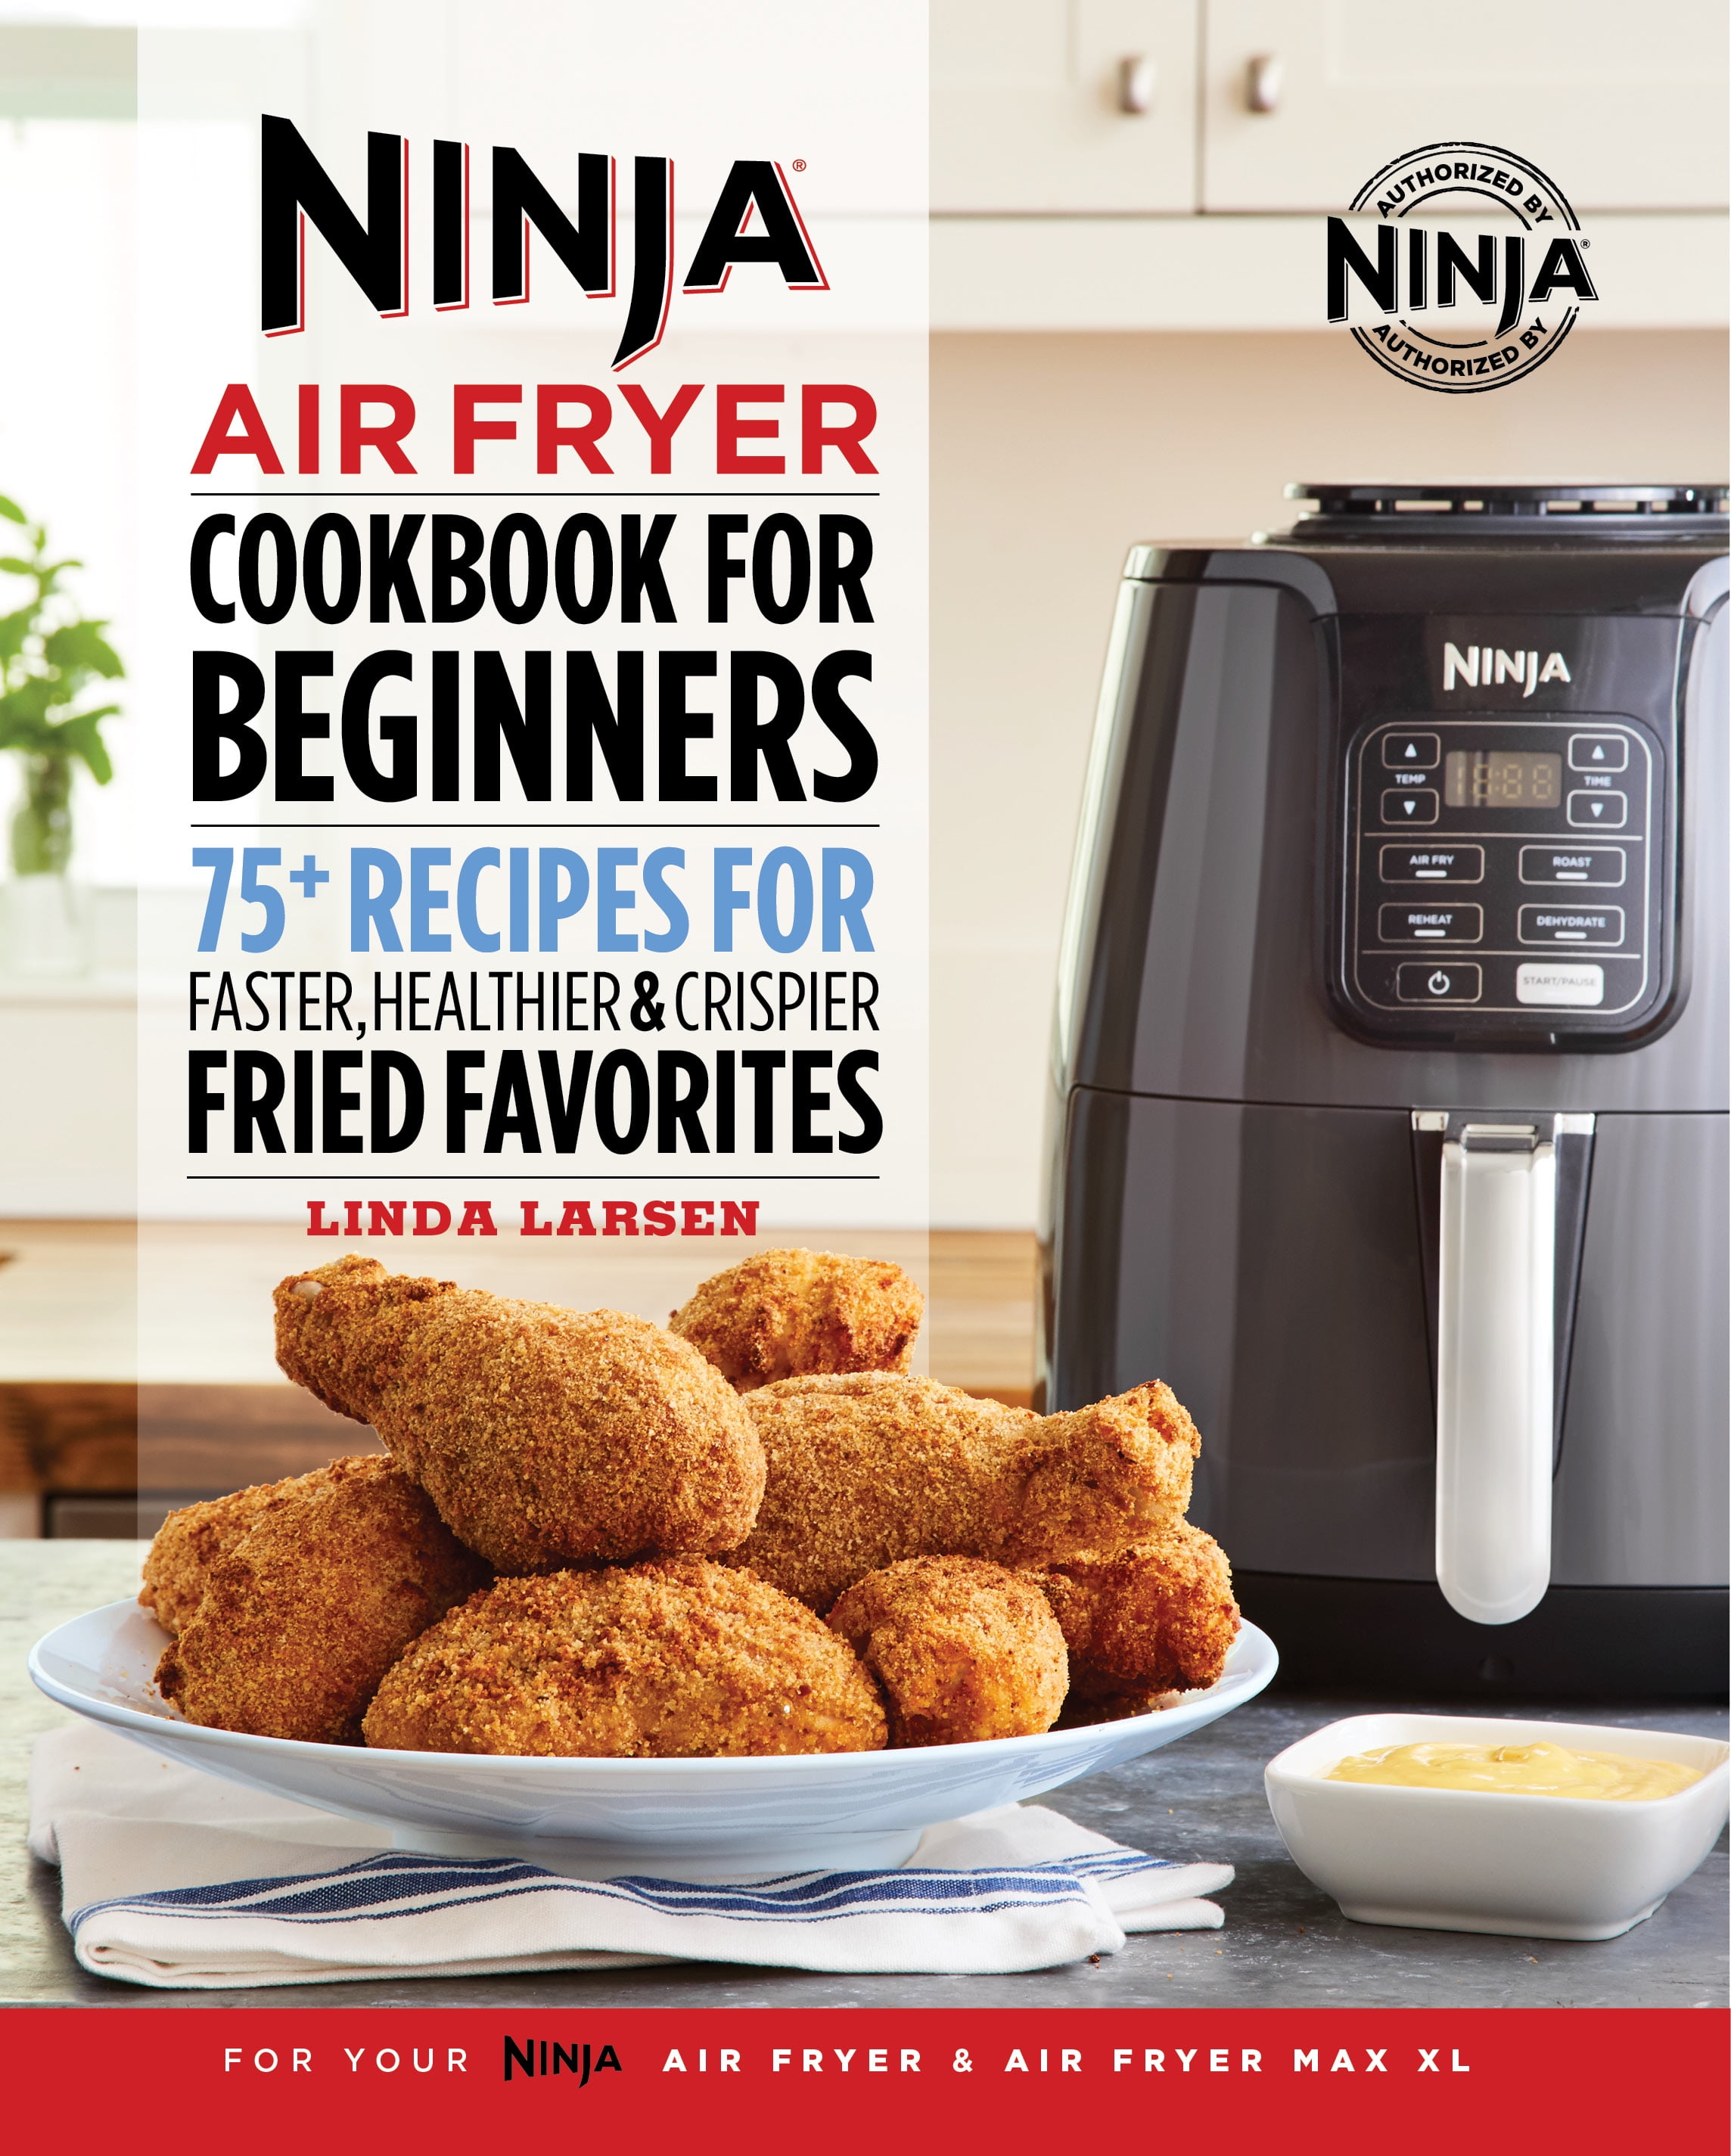 Ninja Air Fryer Cookbook for Beginners 75+ Recipes for Faster